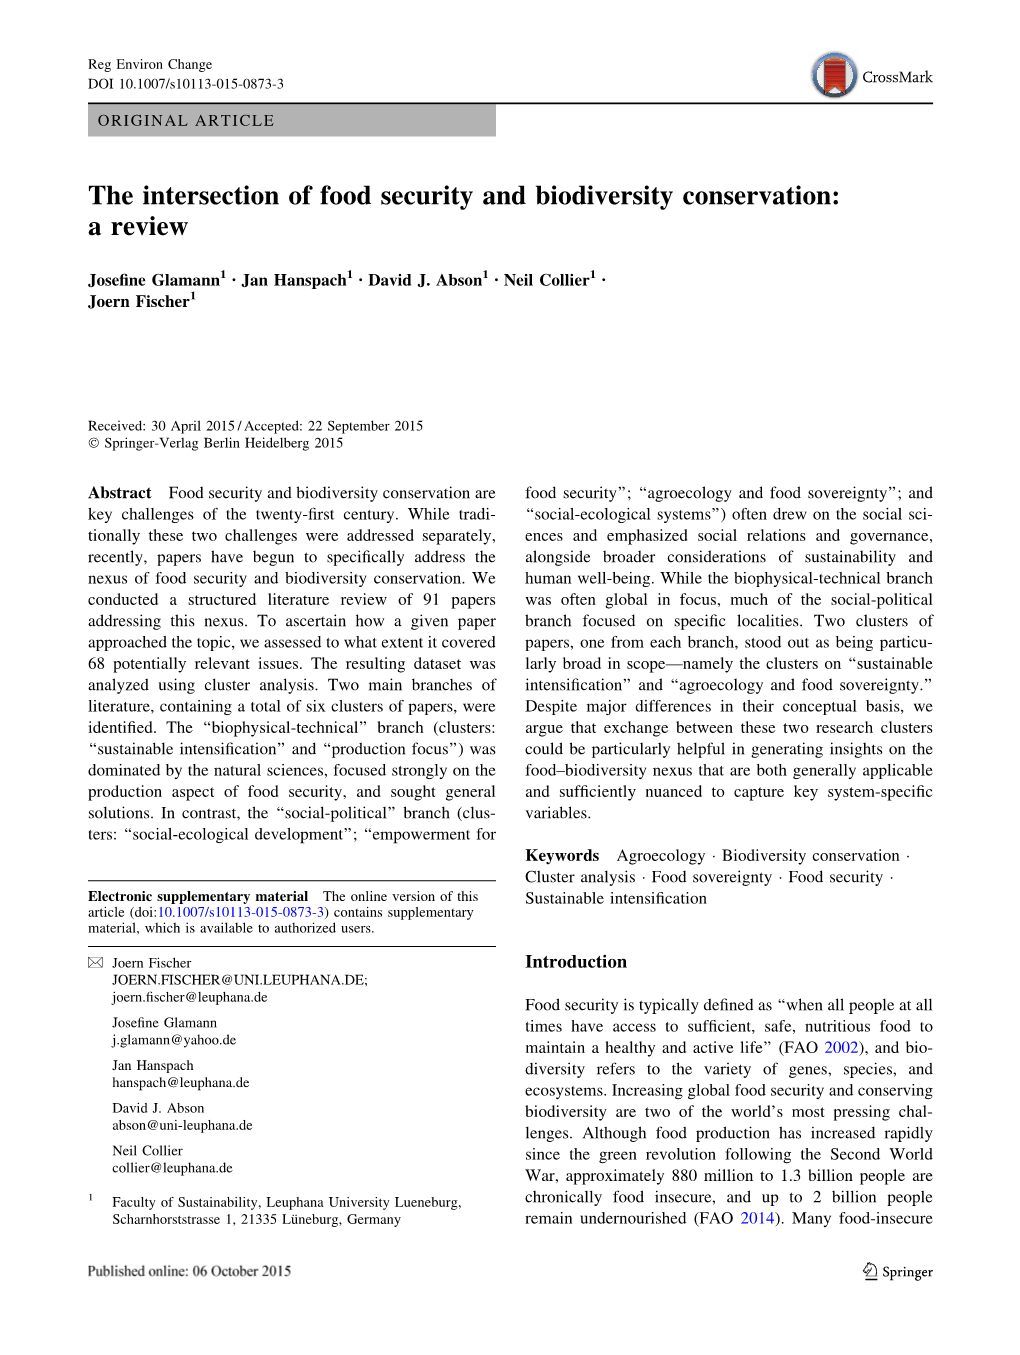 The Intersection of Food Security and Biodiversity Conservation: a Review